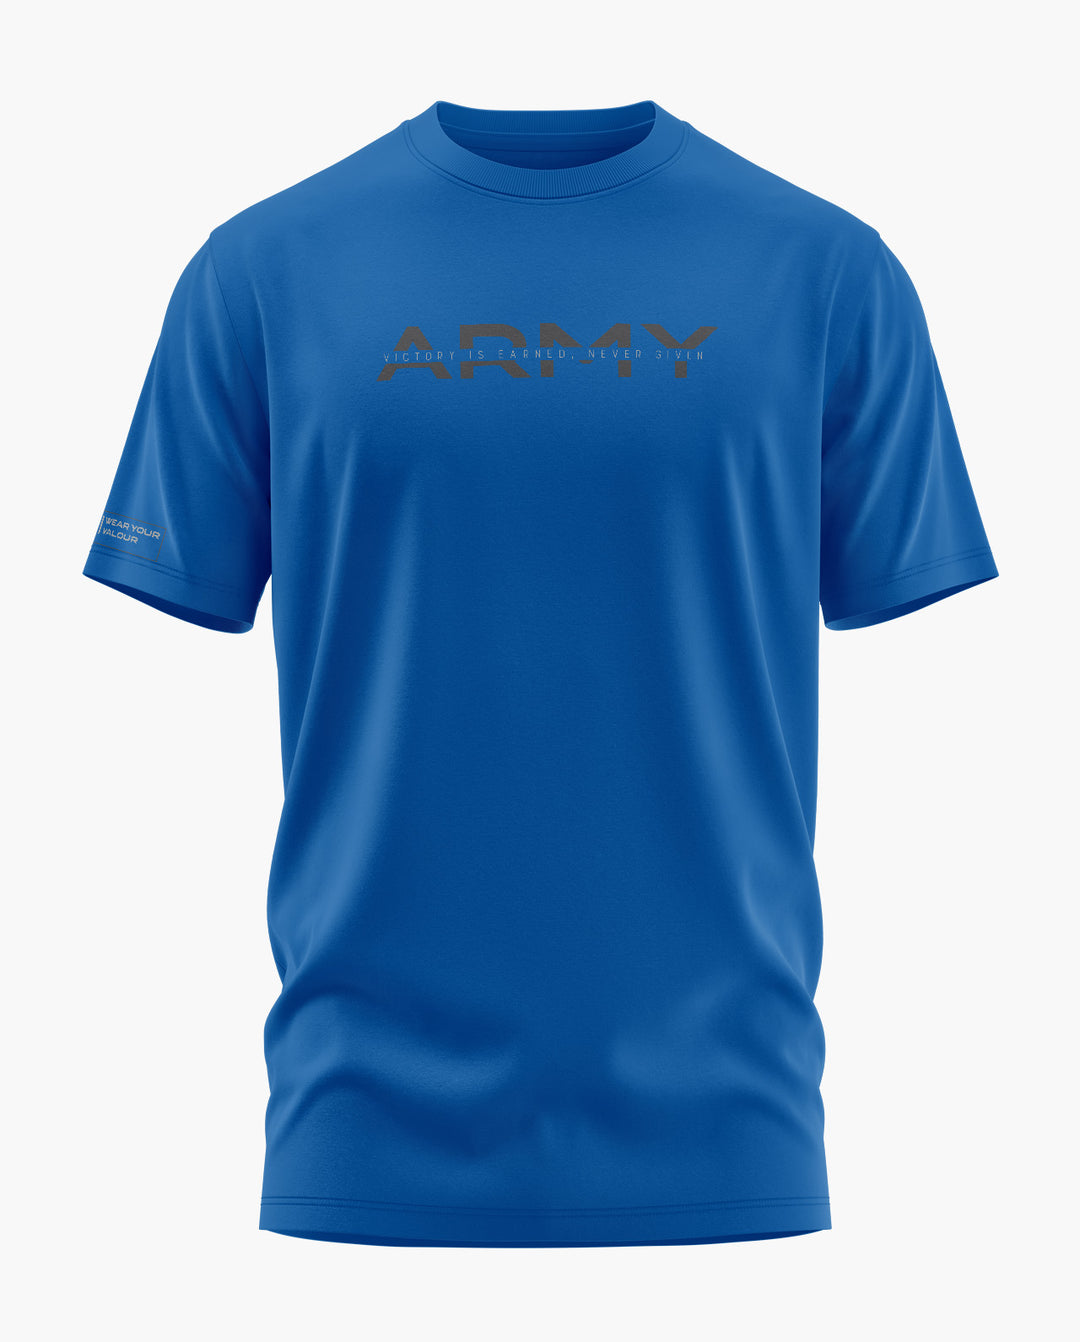 ARMY VICTORY T-Shirt